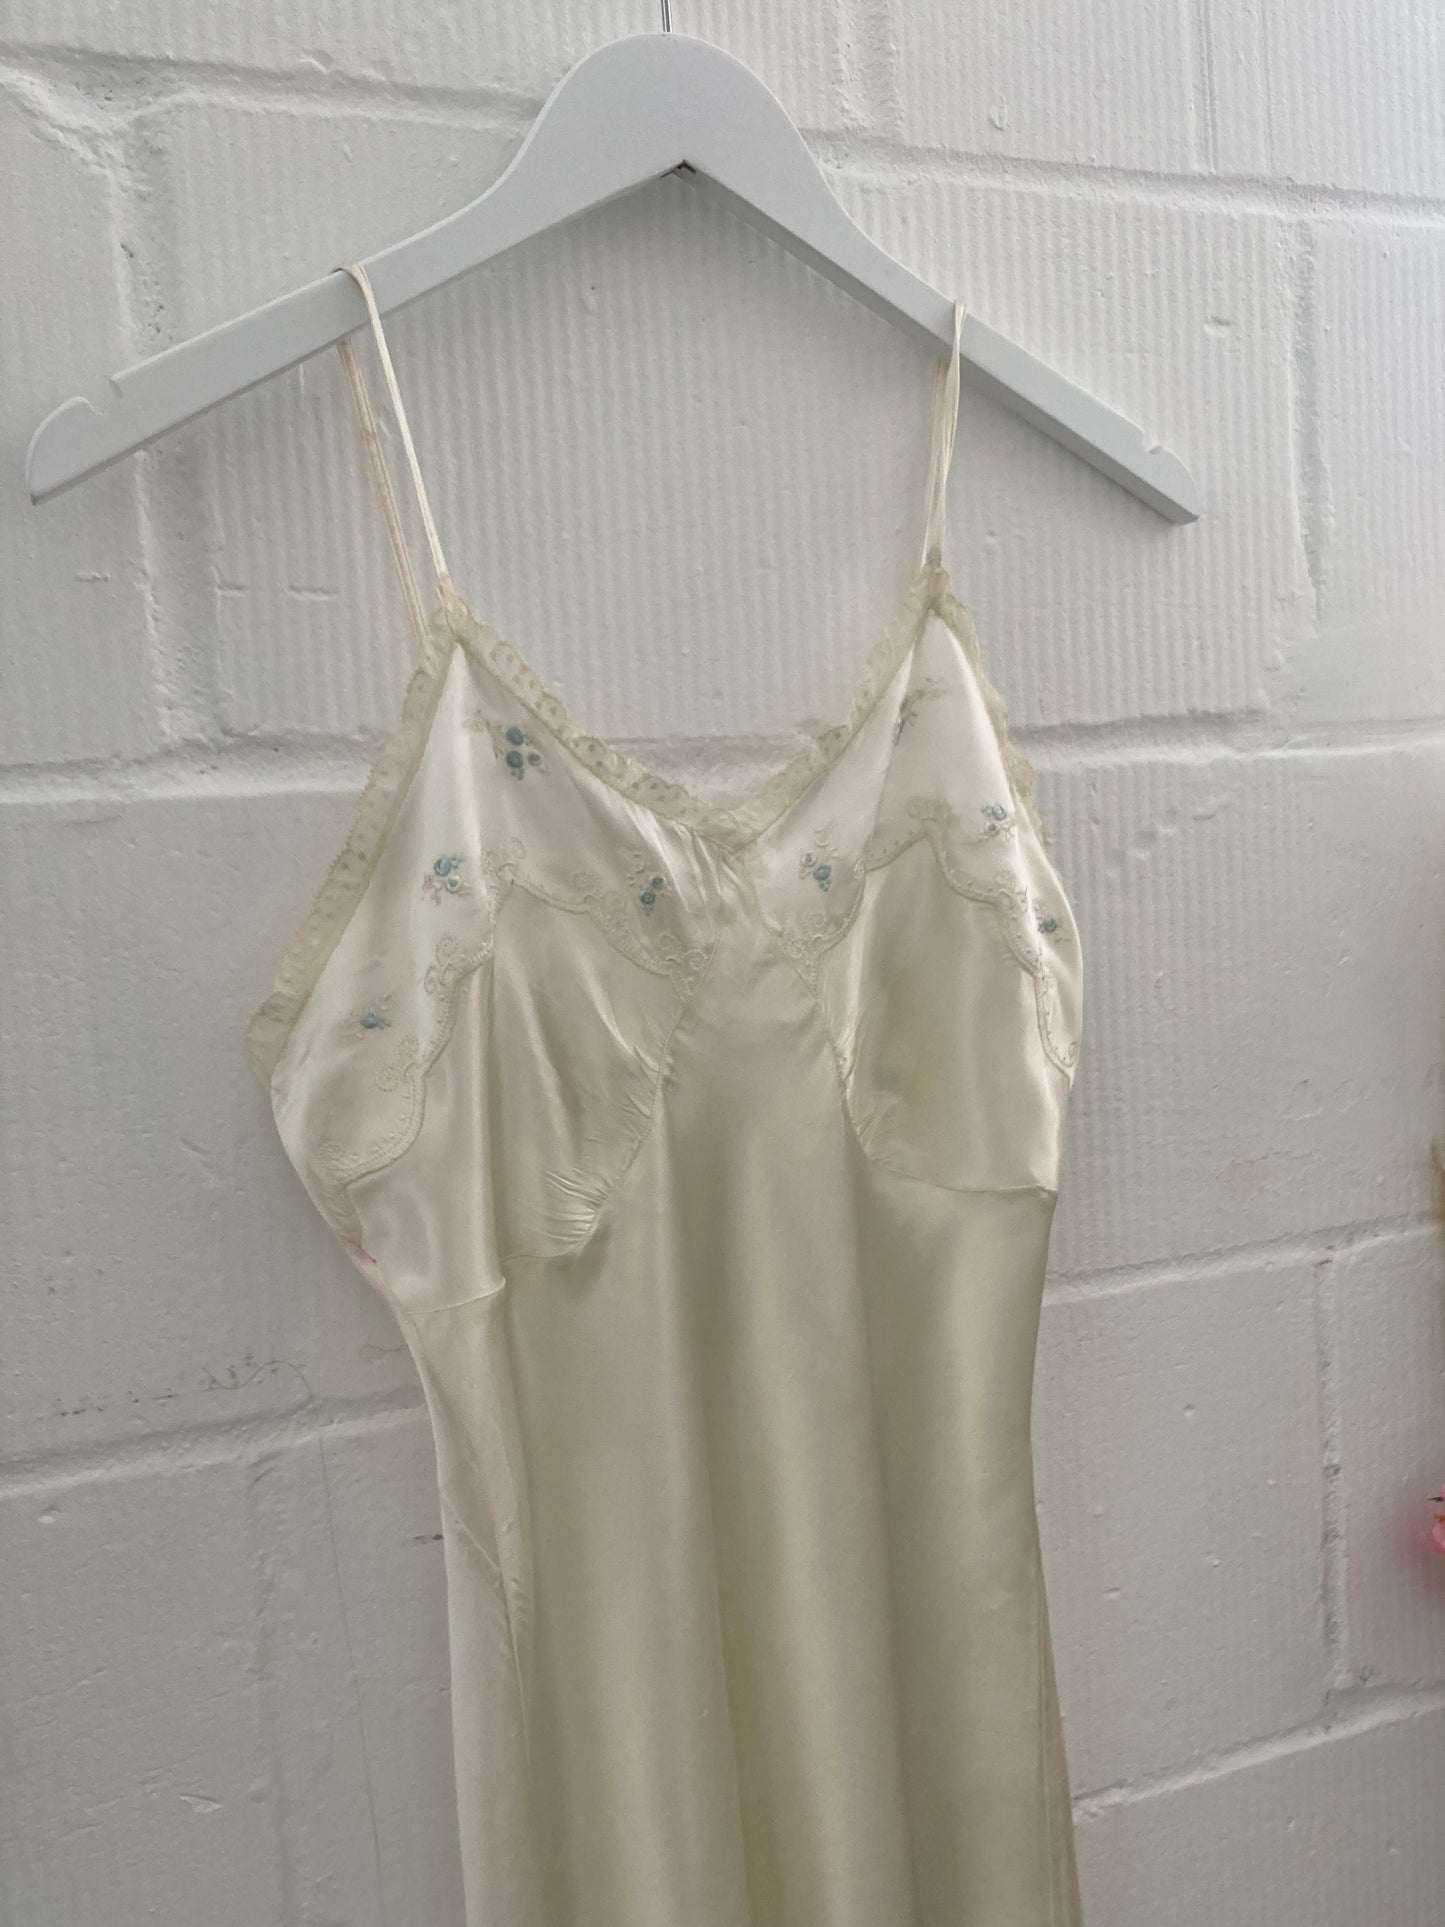 1930s Ivory Slip with Blue Flower Detailing & Spaghetti Straps Size S/M